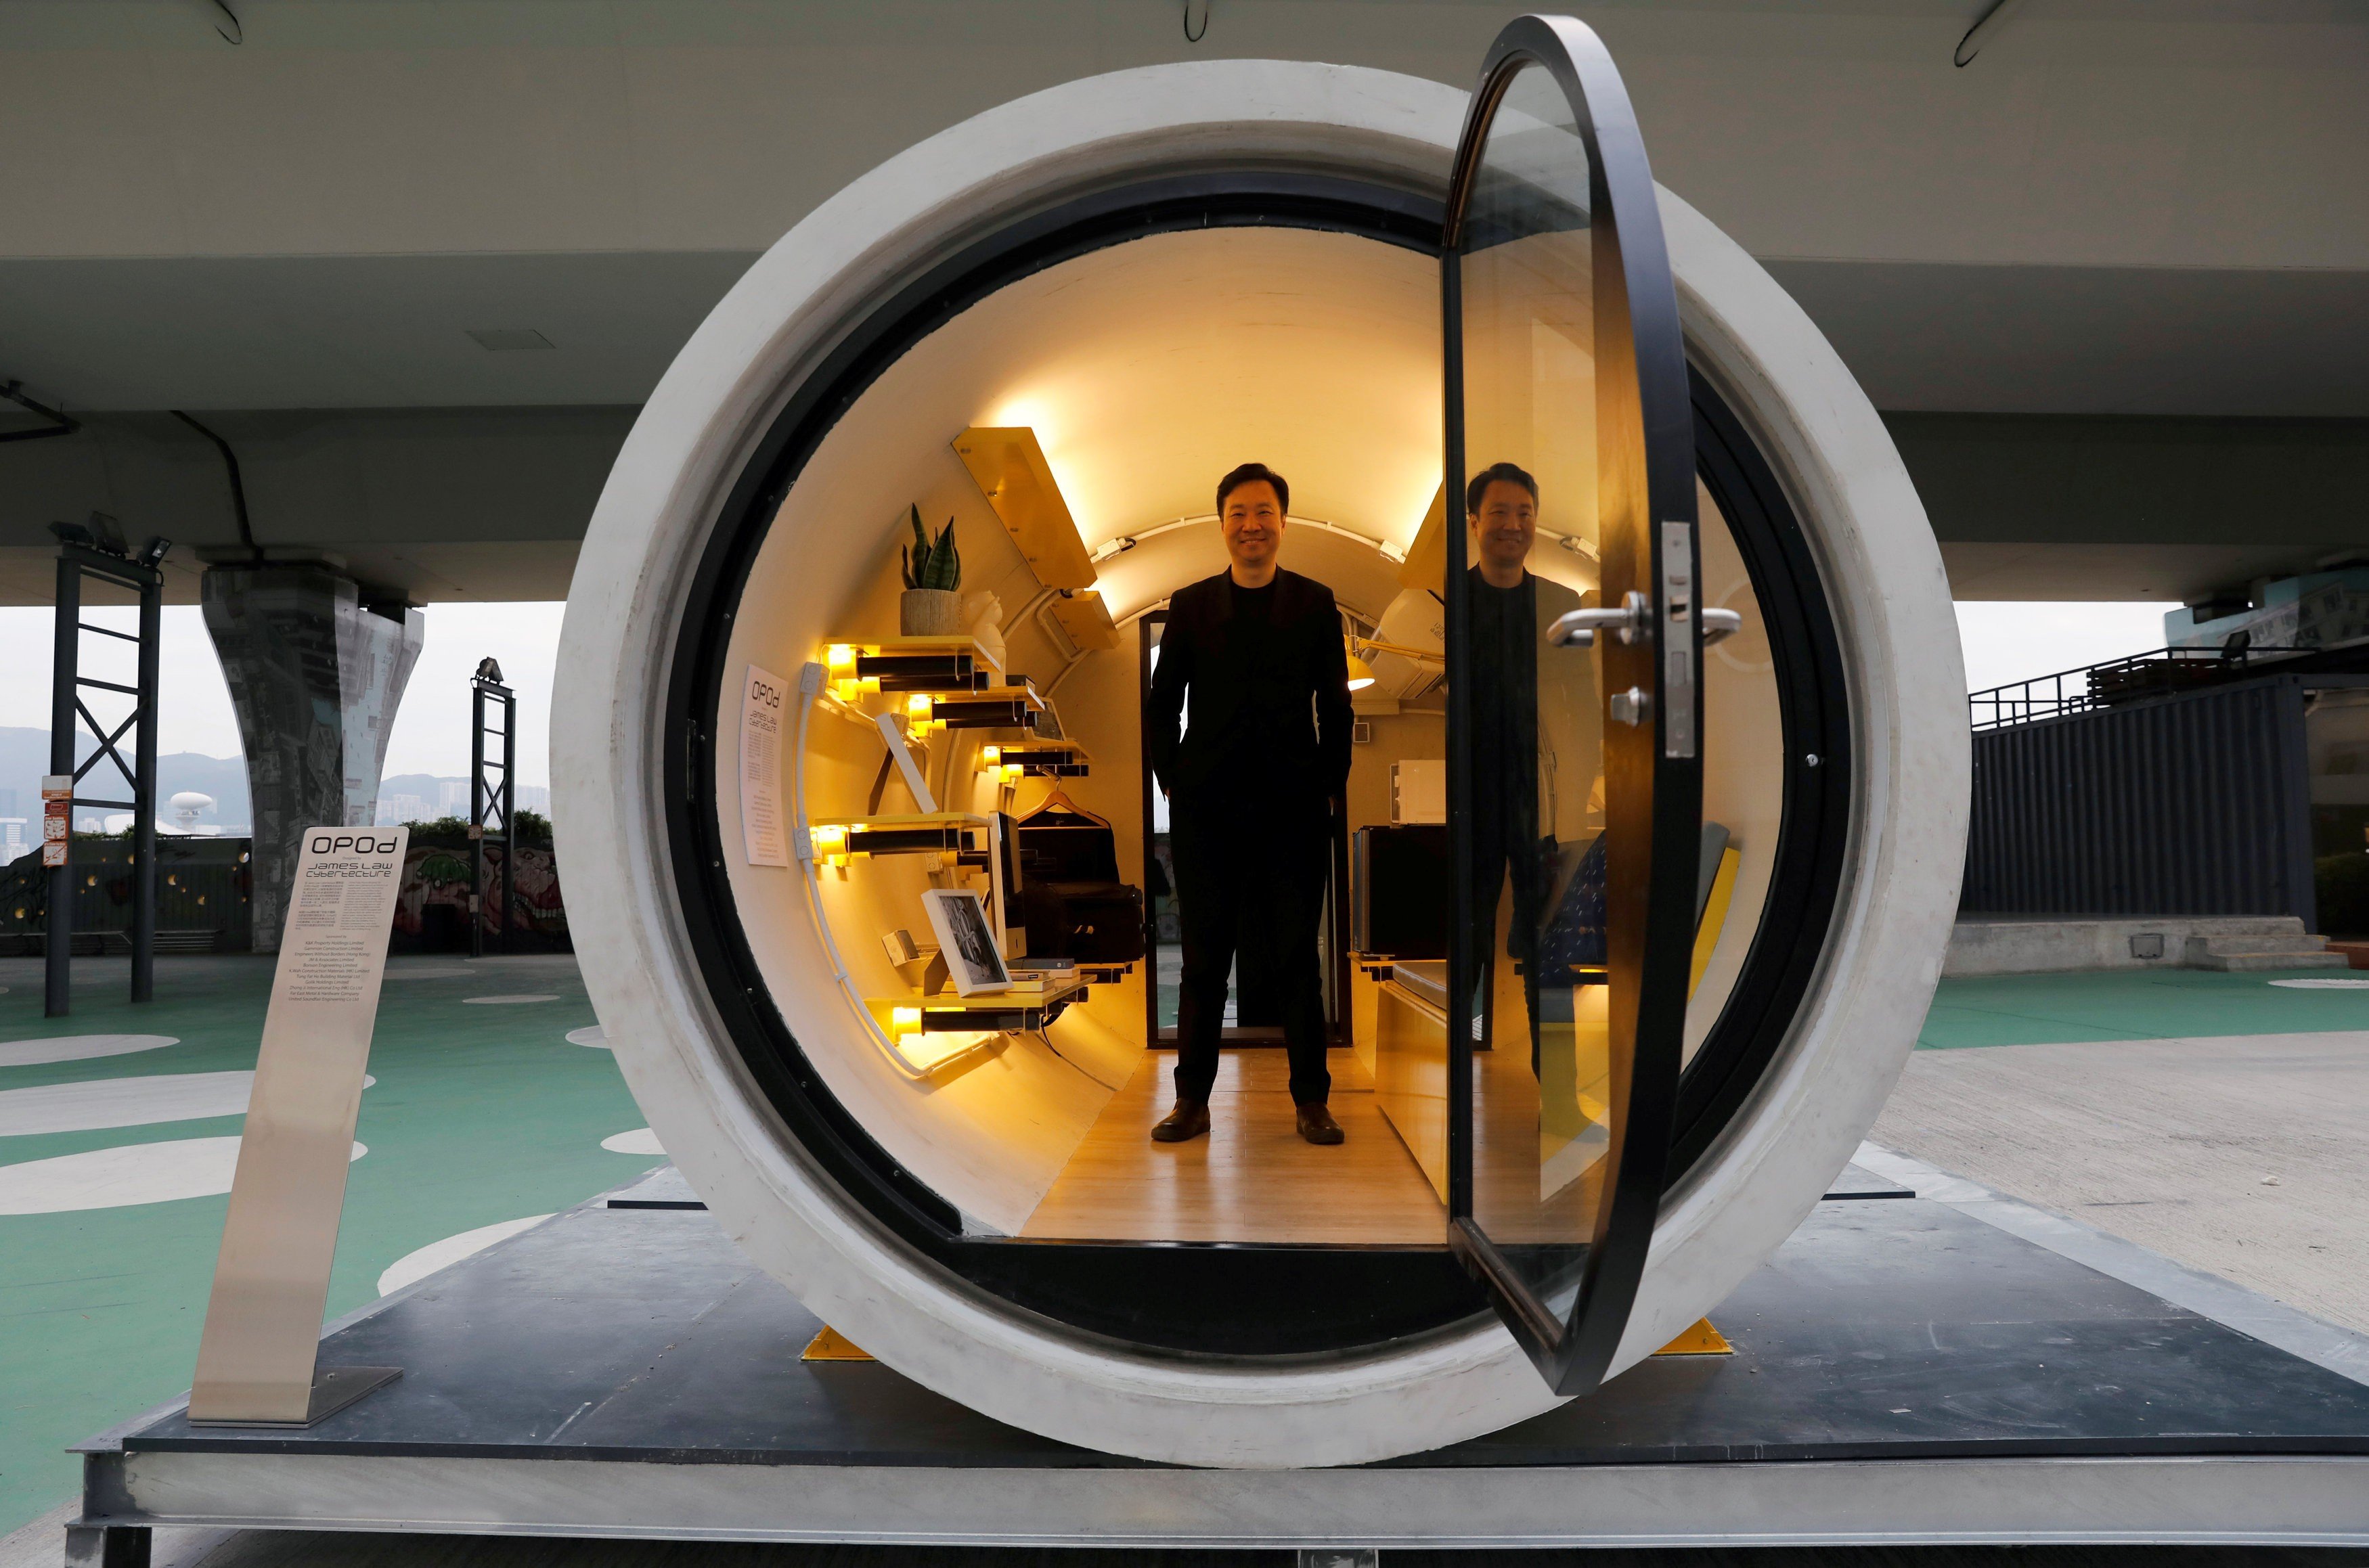 Architect James Law poses earlier this month inside his work, the "Opod" – a 120-square foot giant water pipe, designed as micro-housing in Hong Kong. Photo: Reuters